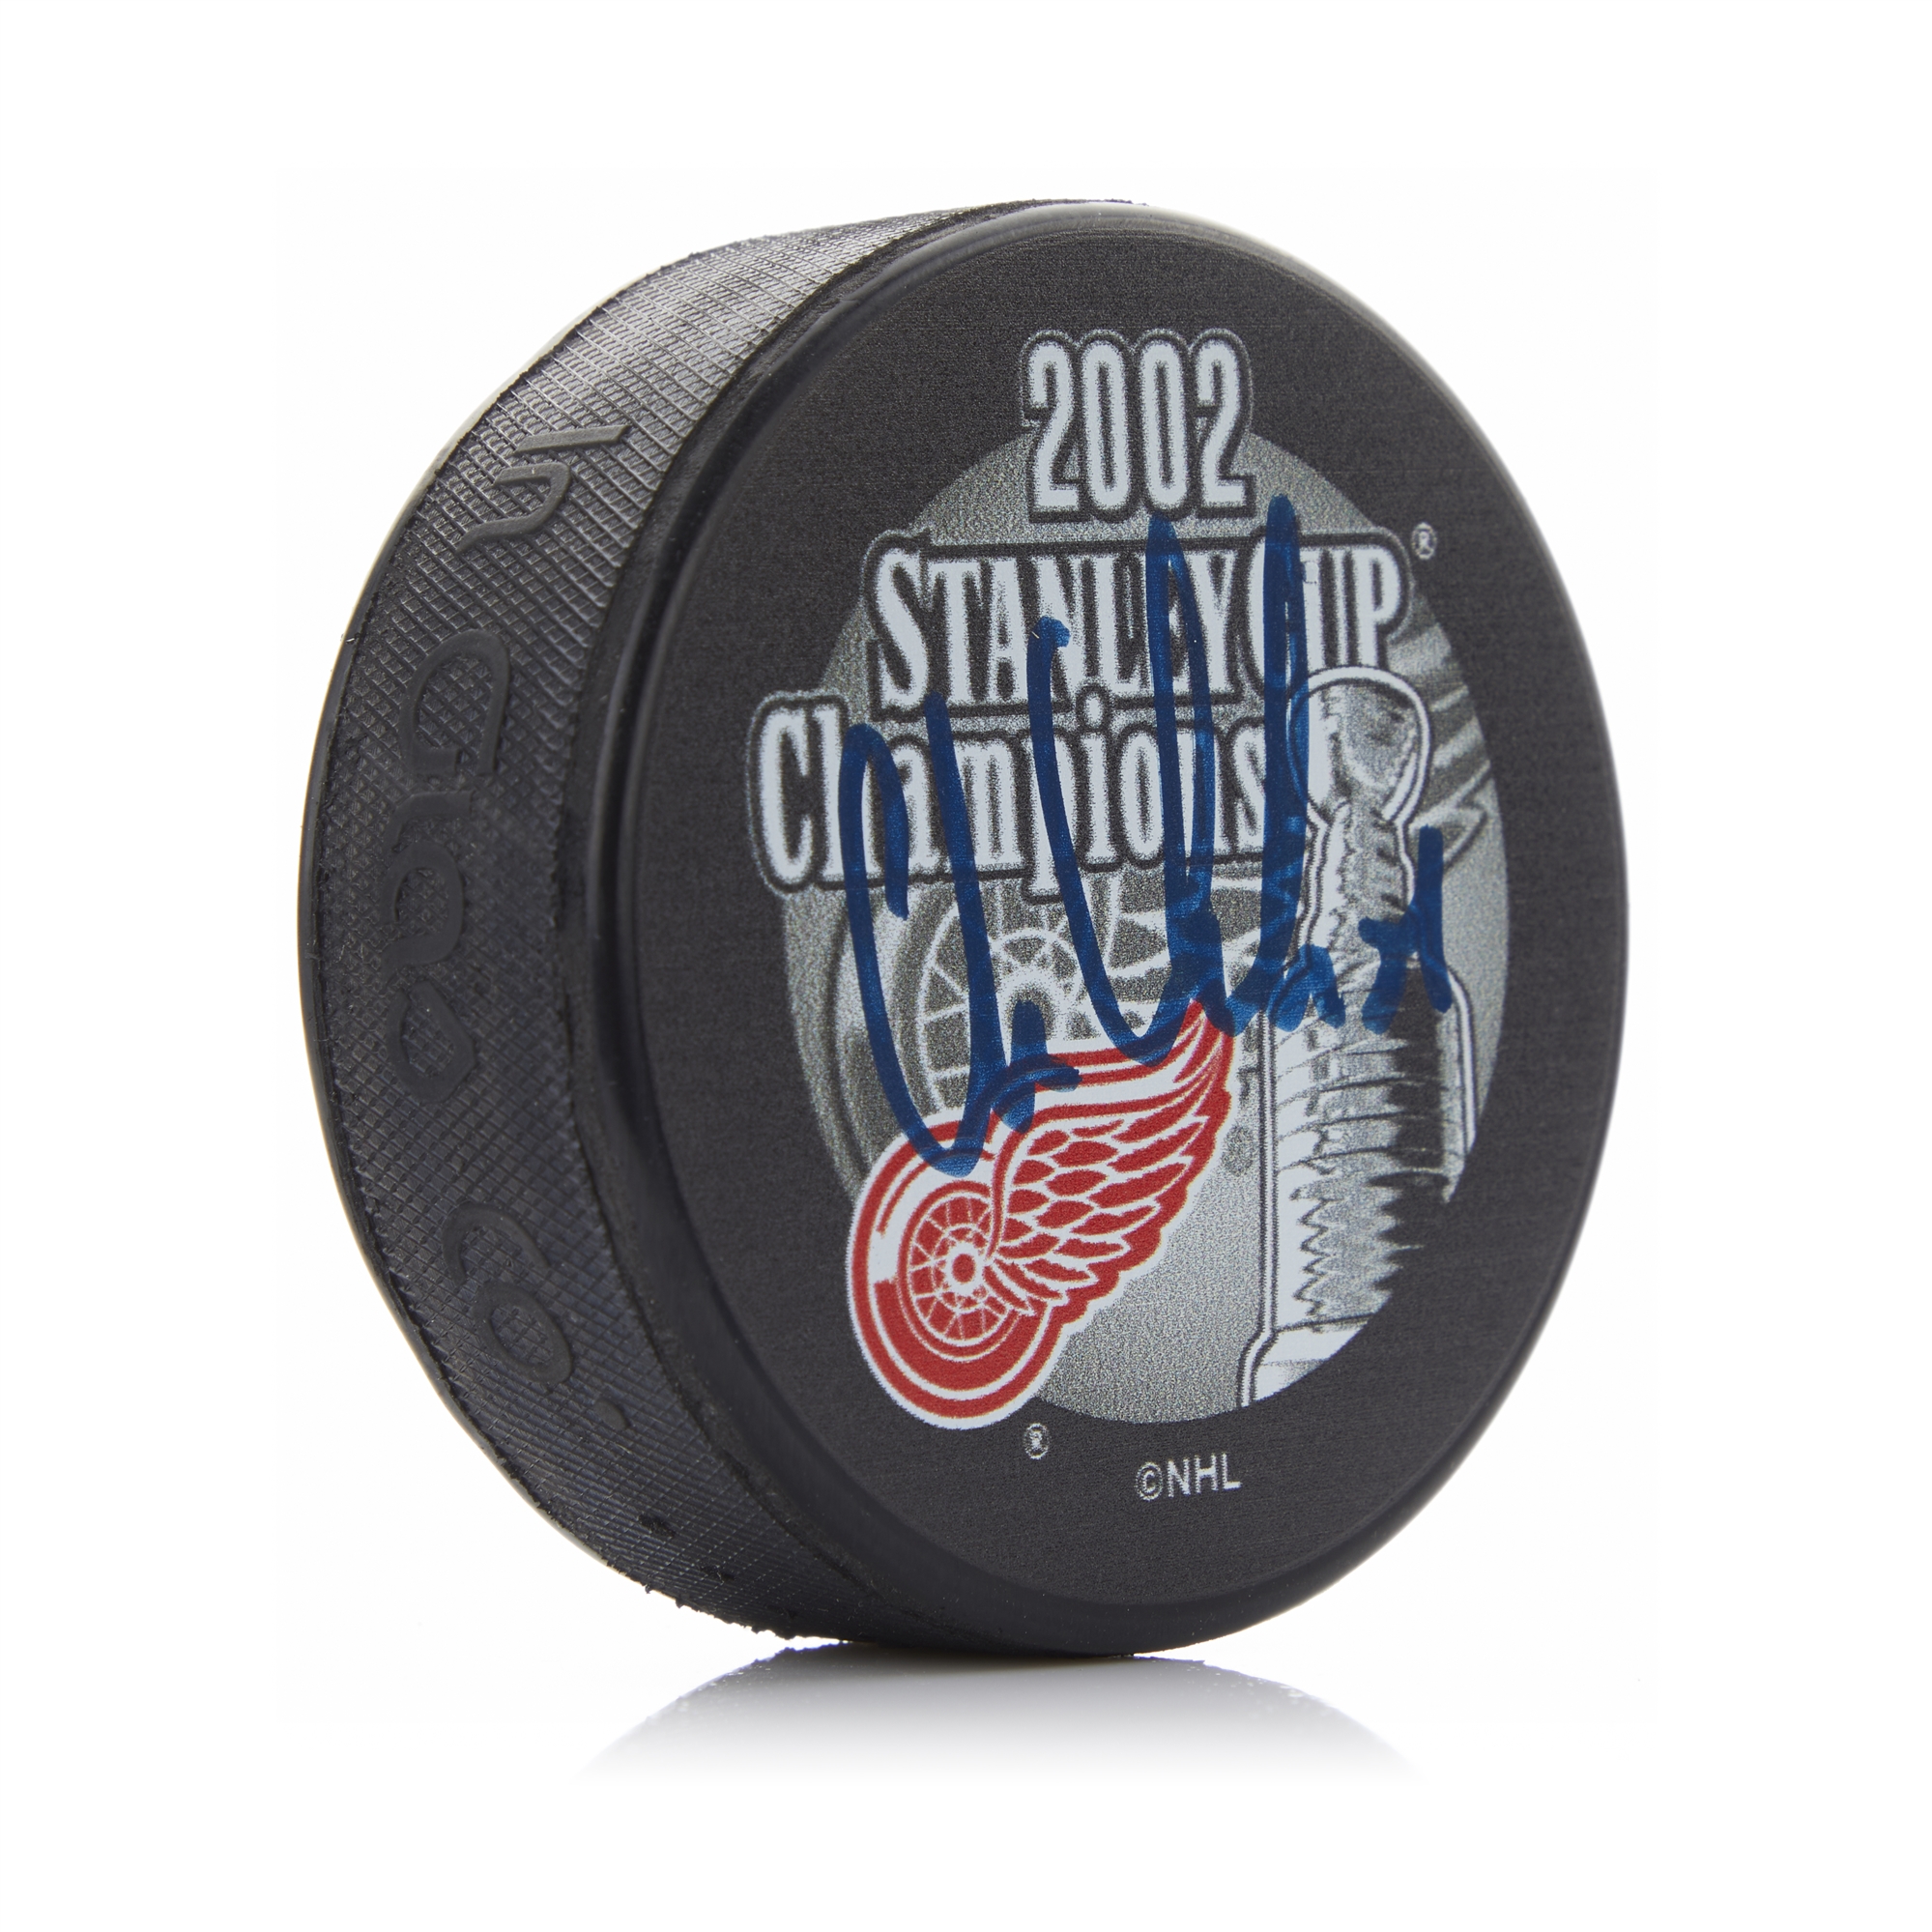 Chris Chelios Signed Detroit Red Wings 2002 Stanley Cup Puck